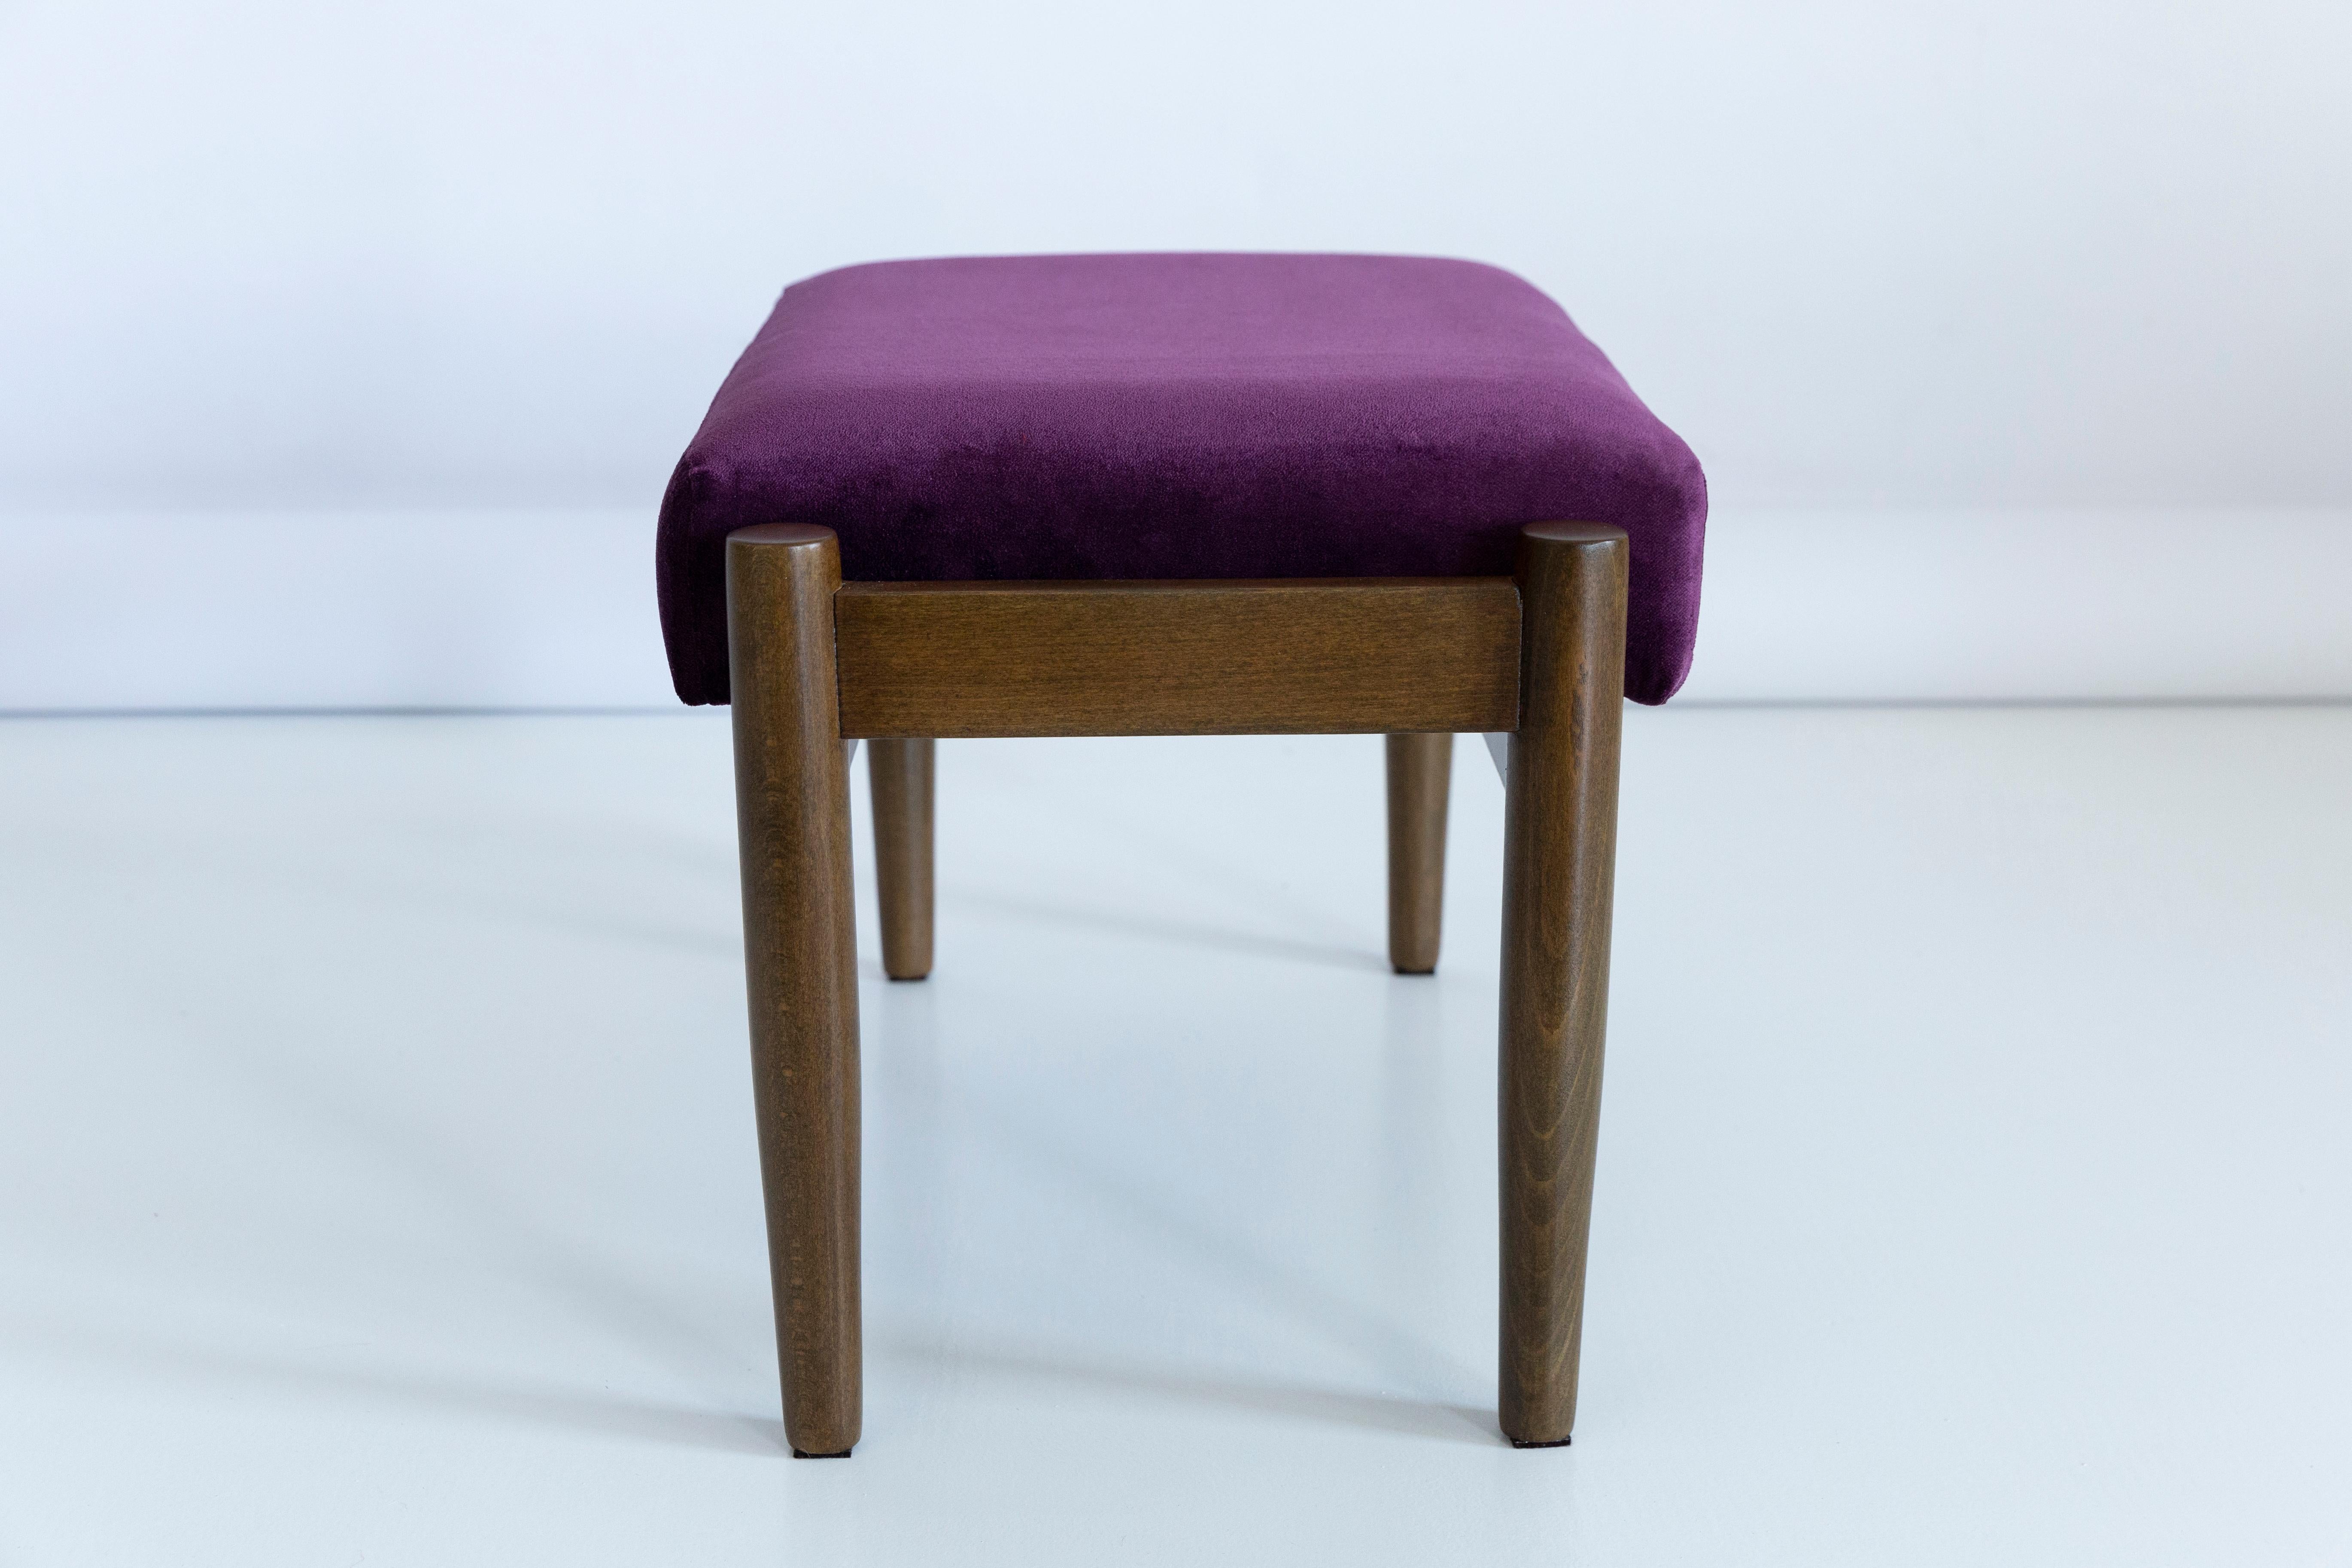 Hand-Crafted 20th Century Plum Violet Vintage Stool, Edmund Homa, 1960s For Sale